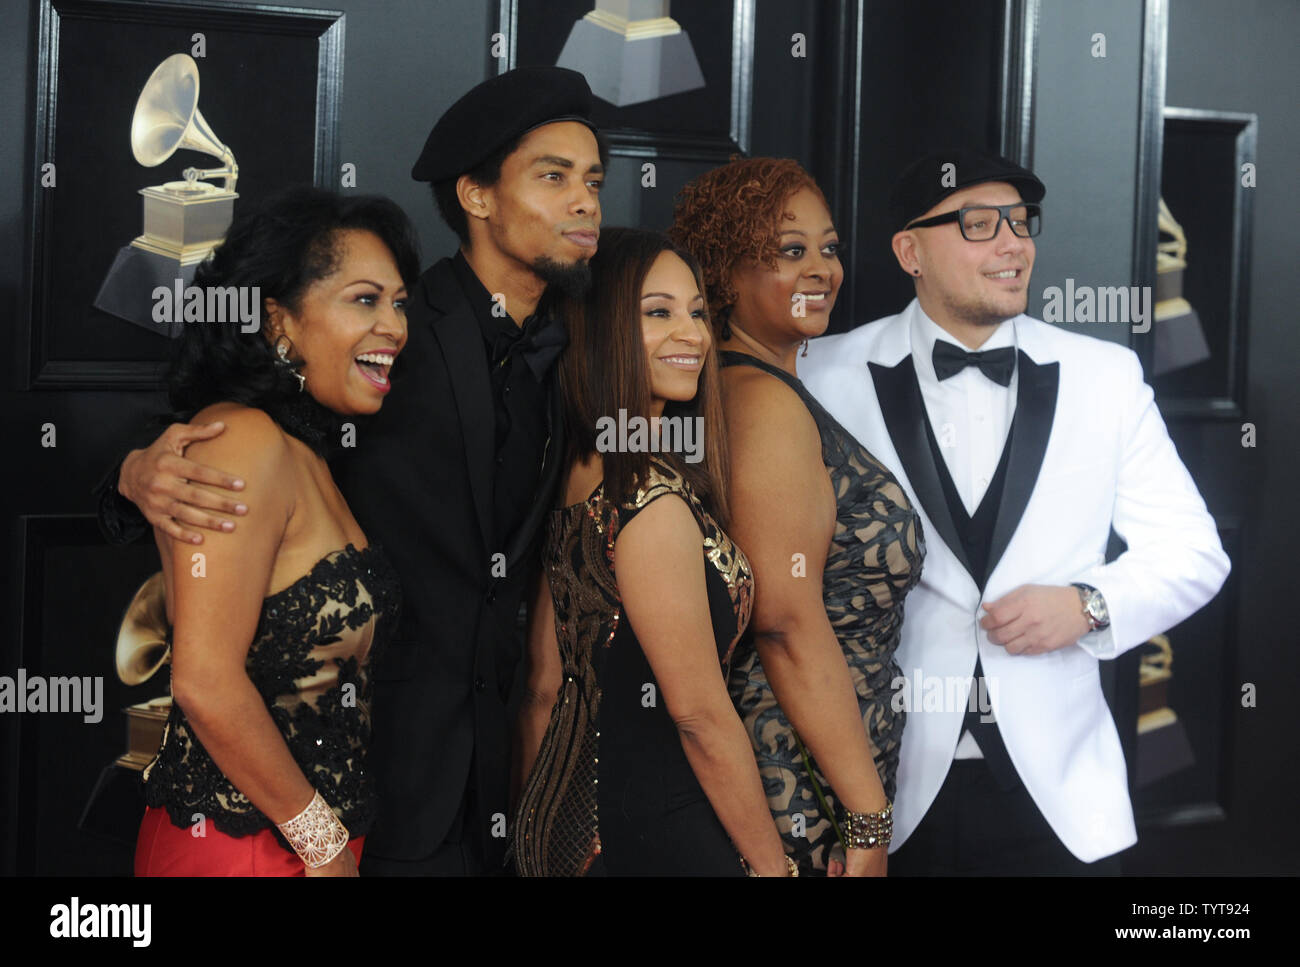 The James Brown family arrive on the red carpet at the 60th Annual Grammy Awards ceremony at Madison Square Garden in New York City on January 28, 2018. The CBS network will broadcast the show live from Madison Square Garden in New York City. It will be the first time since 2003 that the ceremony will not be held in Los Angeles.       Photo by Dennis Van Tine/UPI Stock Photo